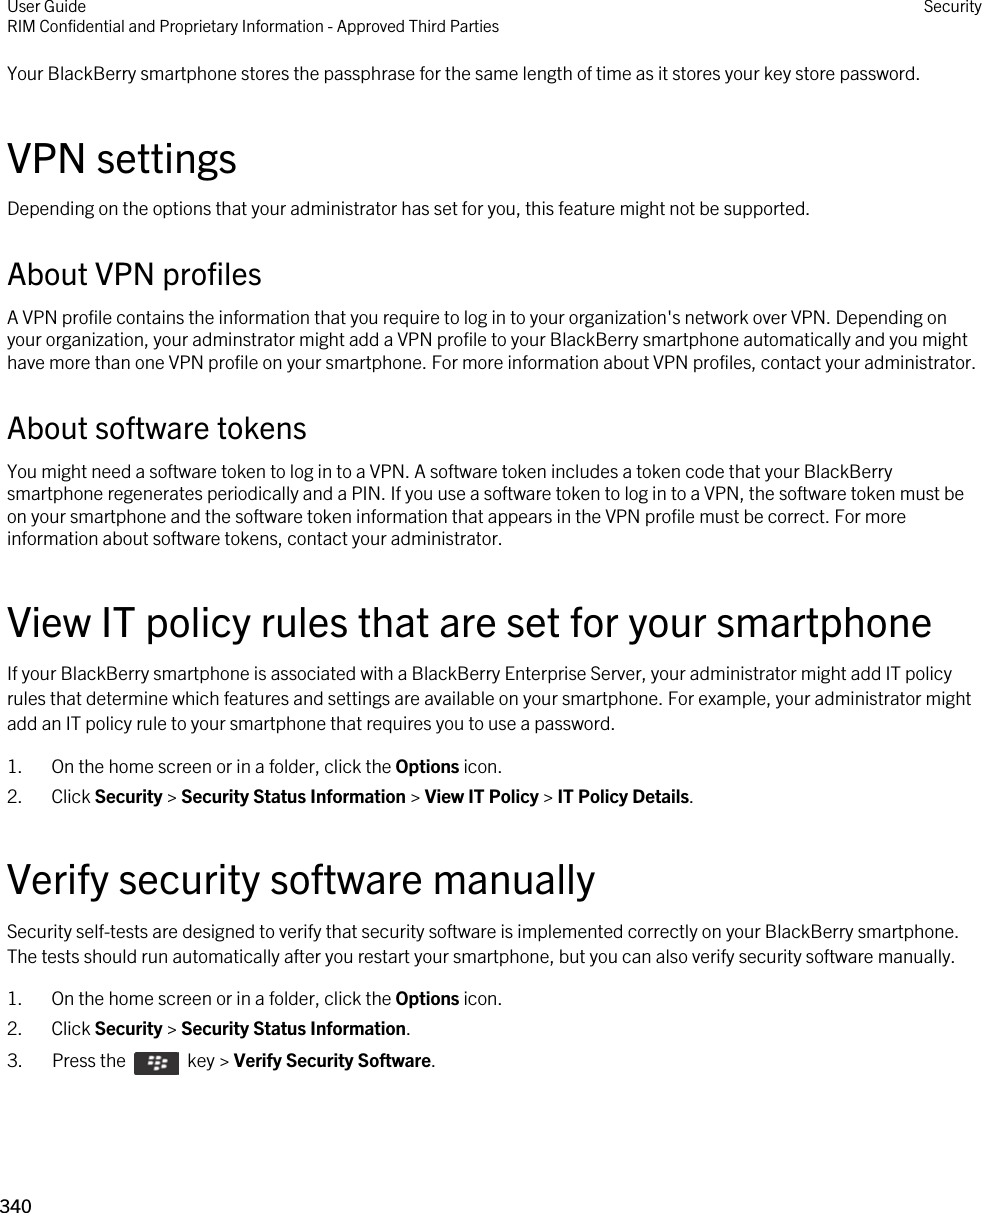 Your BlackBerry smartphone stores the passphrase for the same length of time as it stores your key store password.VPN settingsDepending on the options that your administrator has set for you, this feature might not be supported.About VPN profilesA VPN profile contains the information that you require to log in to your organization&apos;s network over VPN. Depending on your organization, your adminstrator might add a VPN profile to your BlackBerry smartphone automatically and you might have more than one VPN profile on your smartphone. For more information about VPN profiles, contact your administrator.About software tokensYou might need a software token to log in to a VPN. A software token includes a token code that your BlackBerry smartphone regenerates periodically and a PIN. If you use a software token to log in to a VPN, the software token must be on your smartphone and the software token information that appears in the VPN profile must be correct. For more information about software tokens, contact your administrator.View IT policy rules that are set for your smartphoneIf your BlackBerry smartphone is associated with a BlackBerry Enterprise Server, your administrator might add IT policy rules that determine which features and settings are available on your smartphone. For example, your administrator might add an IT policy rule to your smartphone that requires you to use a password.1. On the home screen or in a folder, click the Options icon.2. Click Security &gt; Security Status Information &gt; View IT Policy &gt; IT Policy Details.Verify security software manuallySecurity self-tests are designed to verify that security software is implemented correctly on your BlackBerry smartphone. The tests should run automatically after you restart your smartphone, but you can also verify security software manually.1. On the home screen or in a folder, click the Options icon.2. Click Security &gt; Security Status Information.3.  Press the    key &gt; Verify Security Software. User GuideRIM Confidential and Proprietary Information - Approved Third Parties Security340 